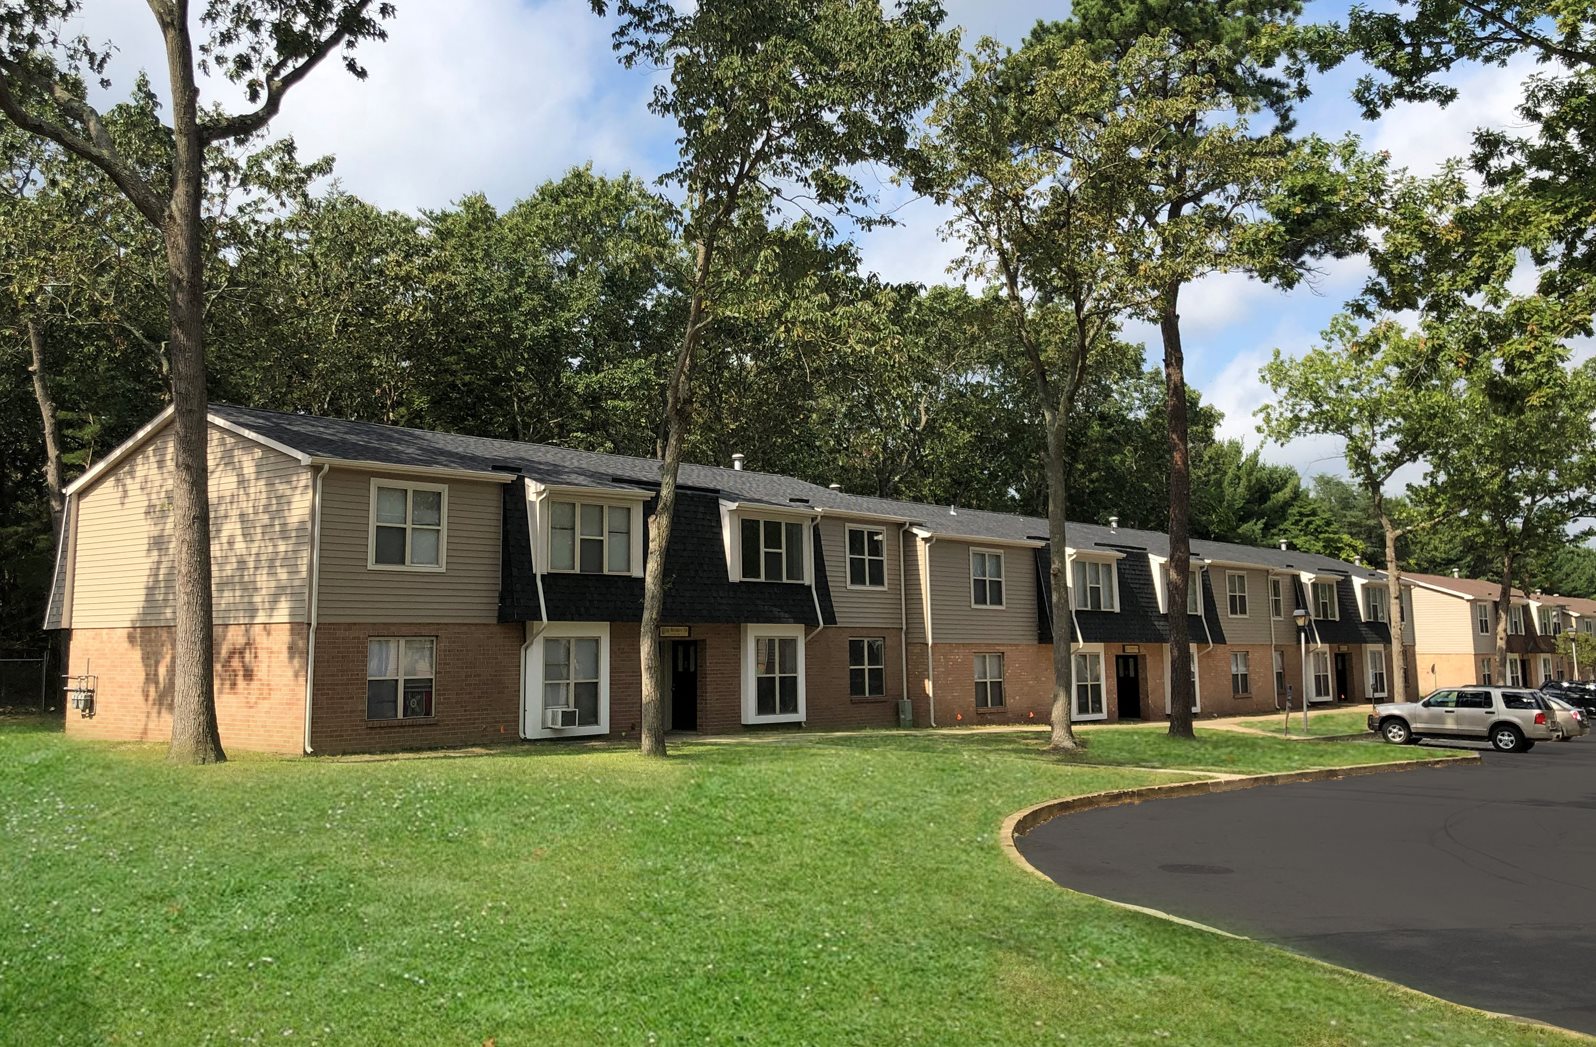 Chalet Gardens Apartments Apartments In Pine Hill Nj